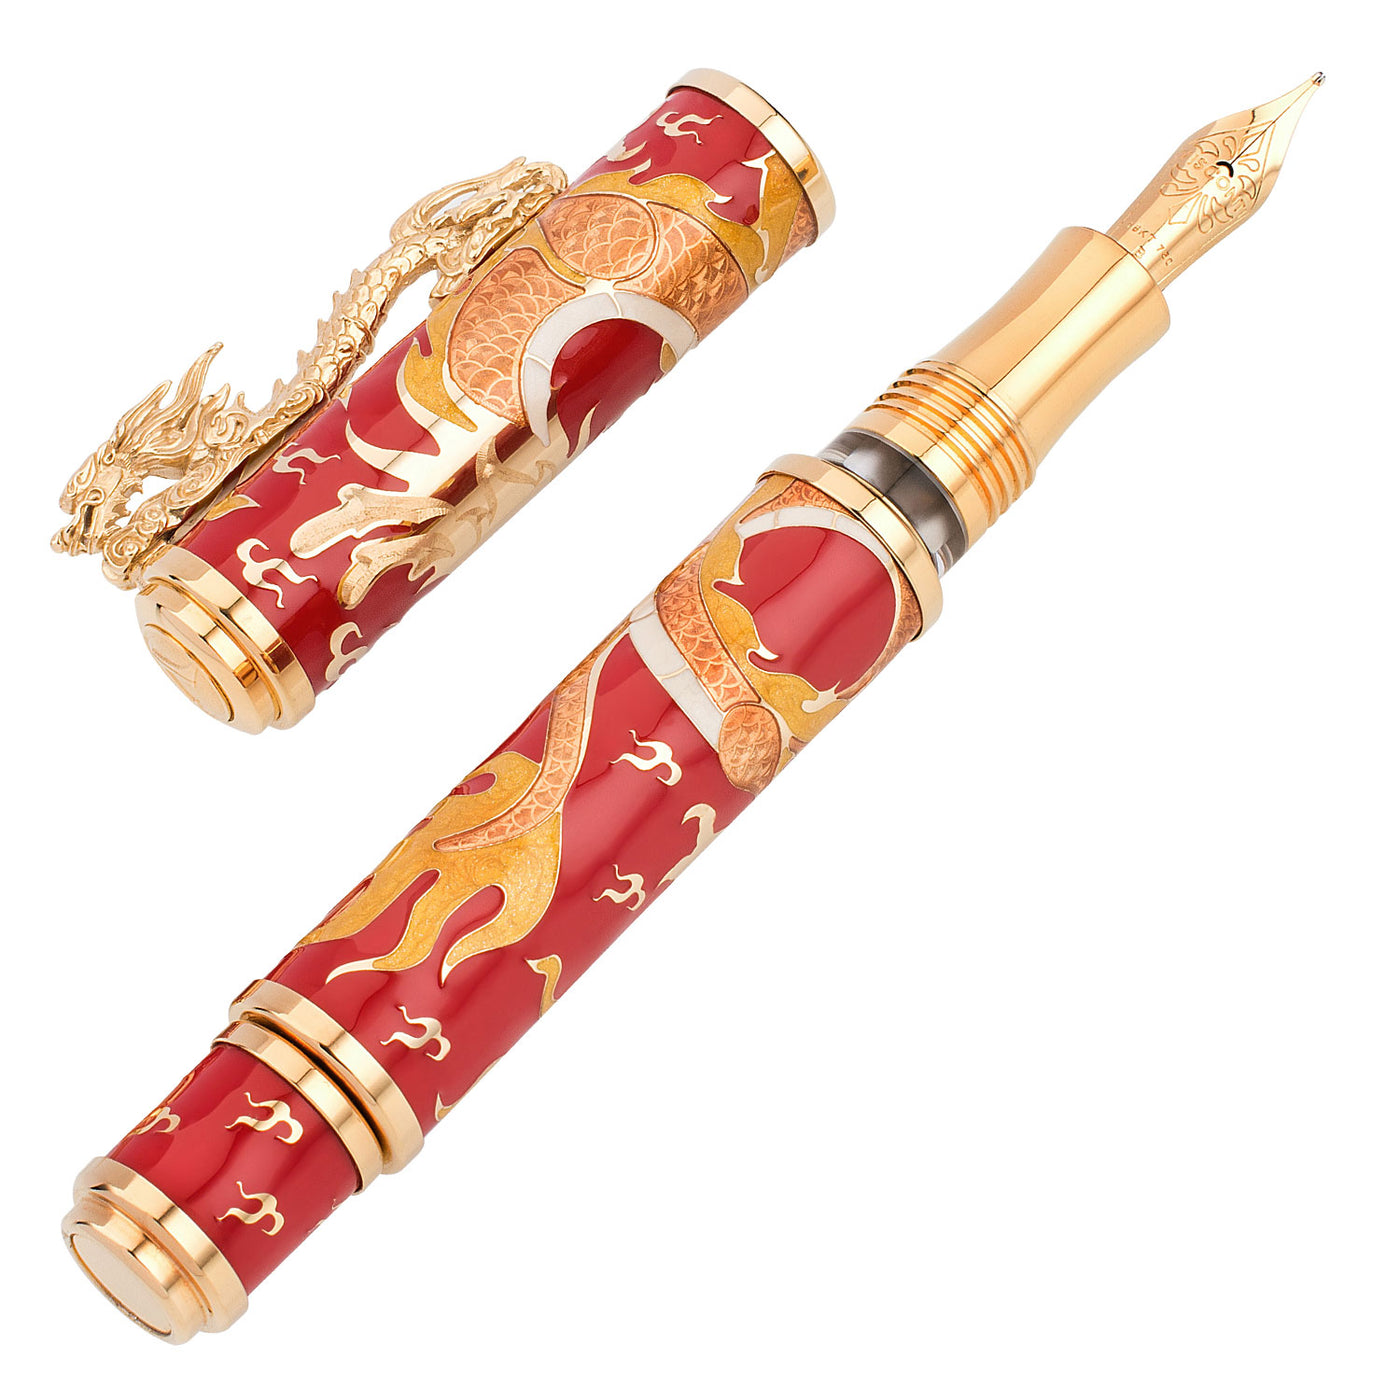 Visconti Year of the Dragon Limited Edition Fountain Pen 2